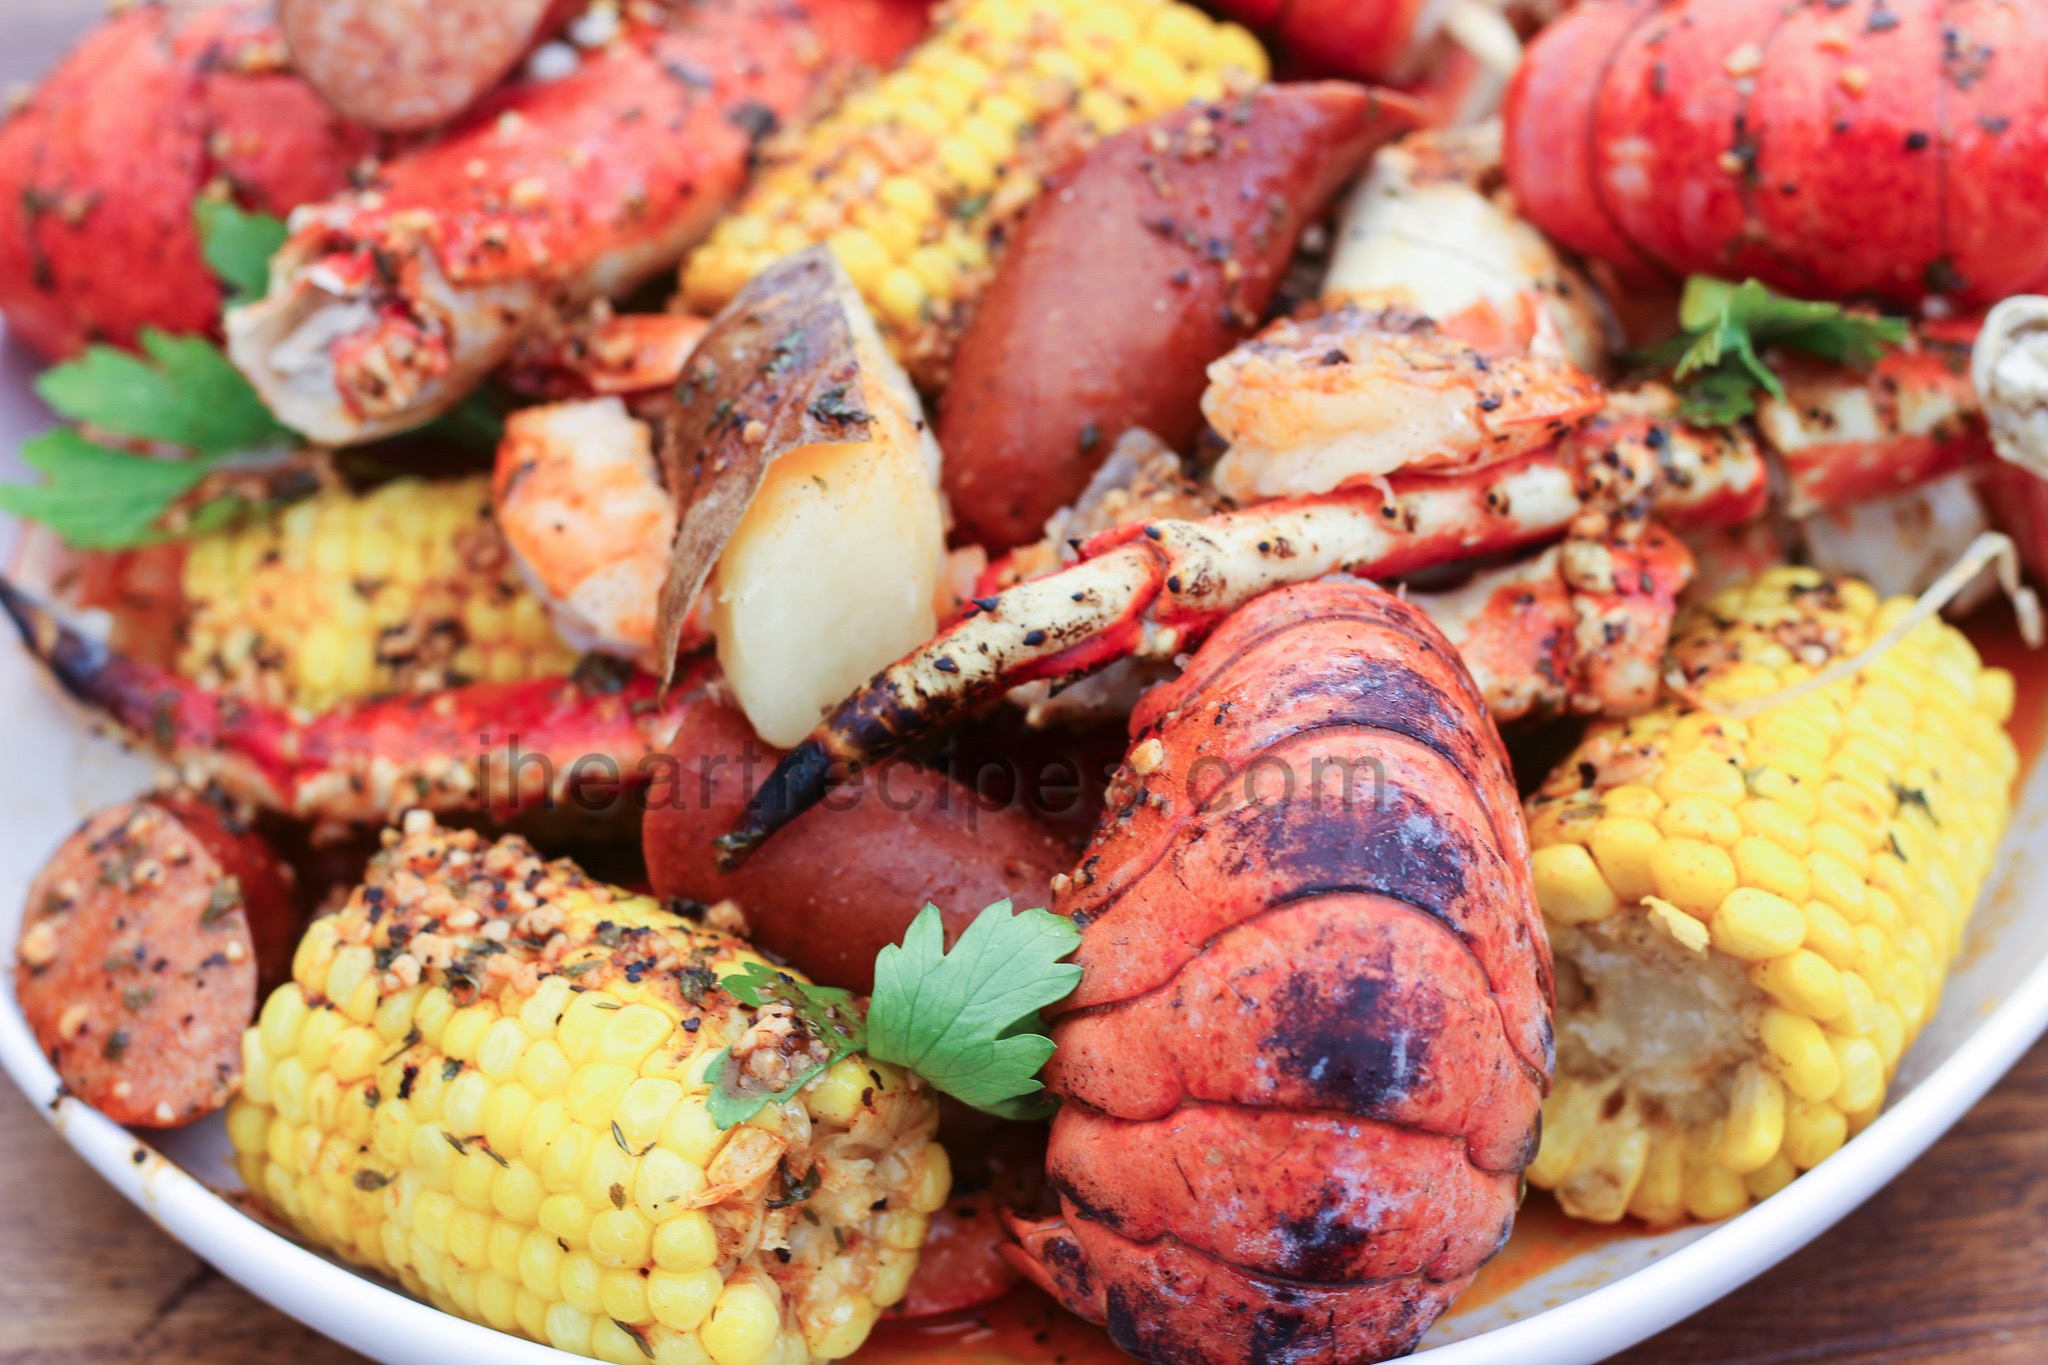 The Ultimate Seafood Boil I Heart Recipes How to make a seafood boil without a recipe. the ultimate seafood boil i heart recipes